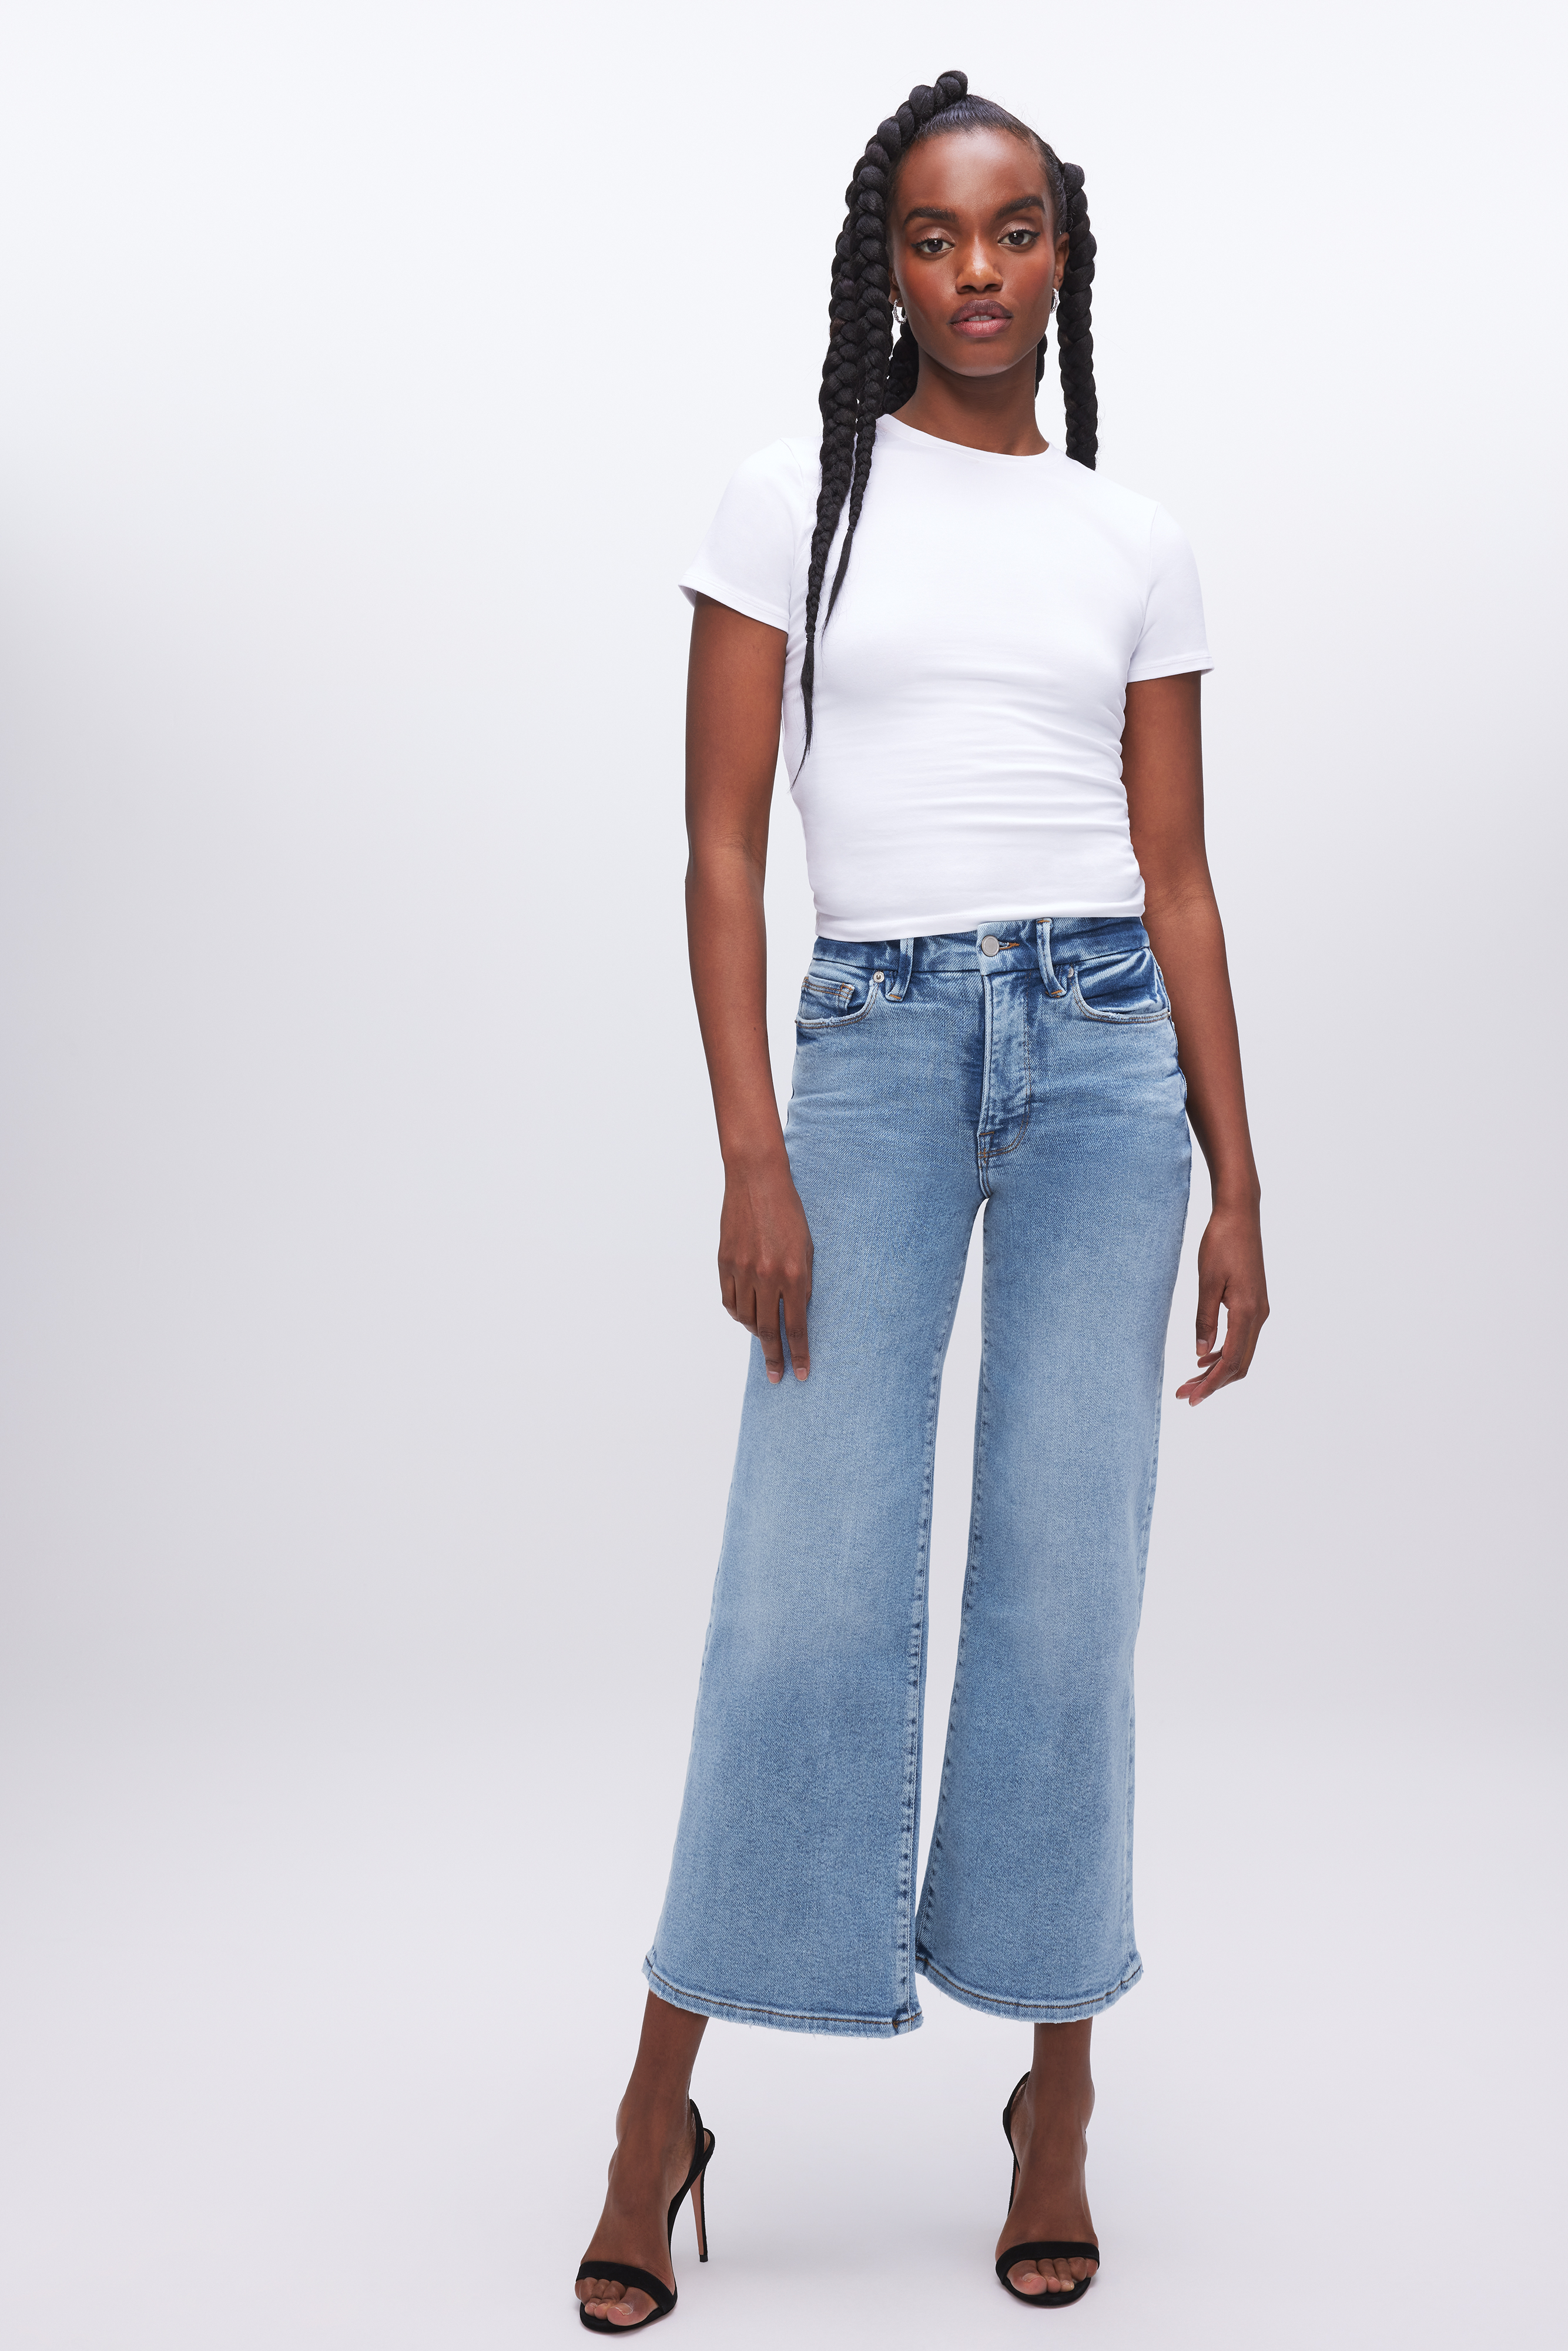 Styled with GOOD WAIST PALAZZO CROPPED JEANS | INDIGO479